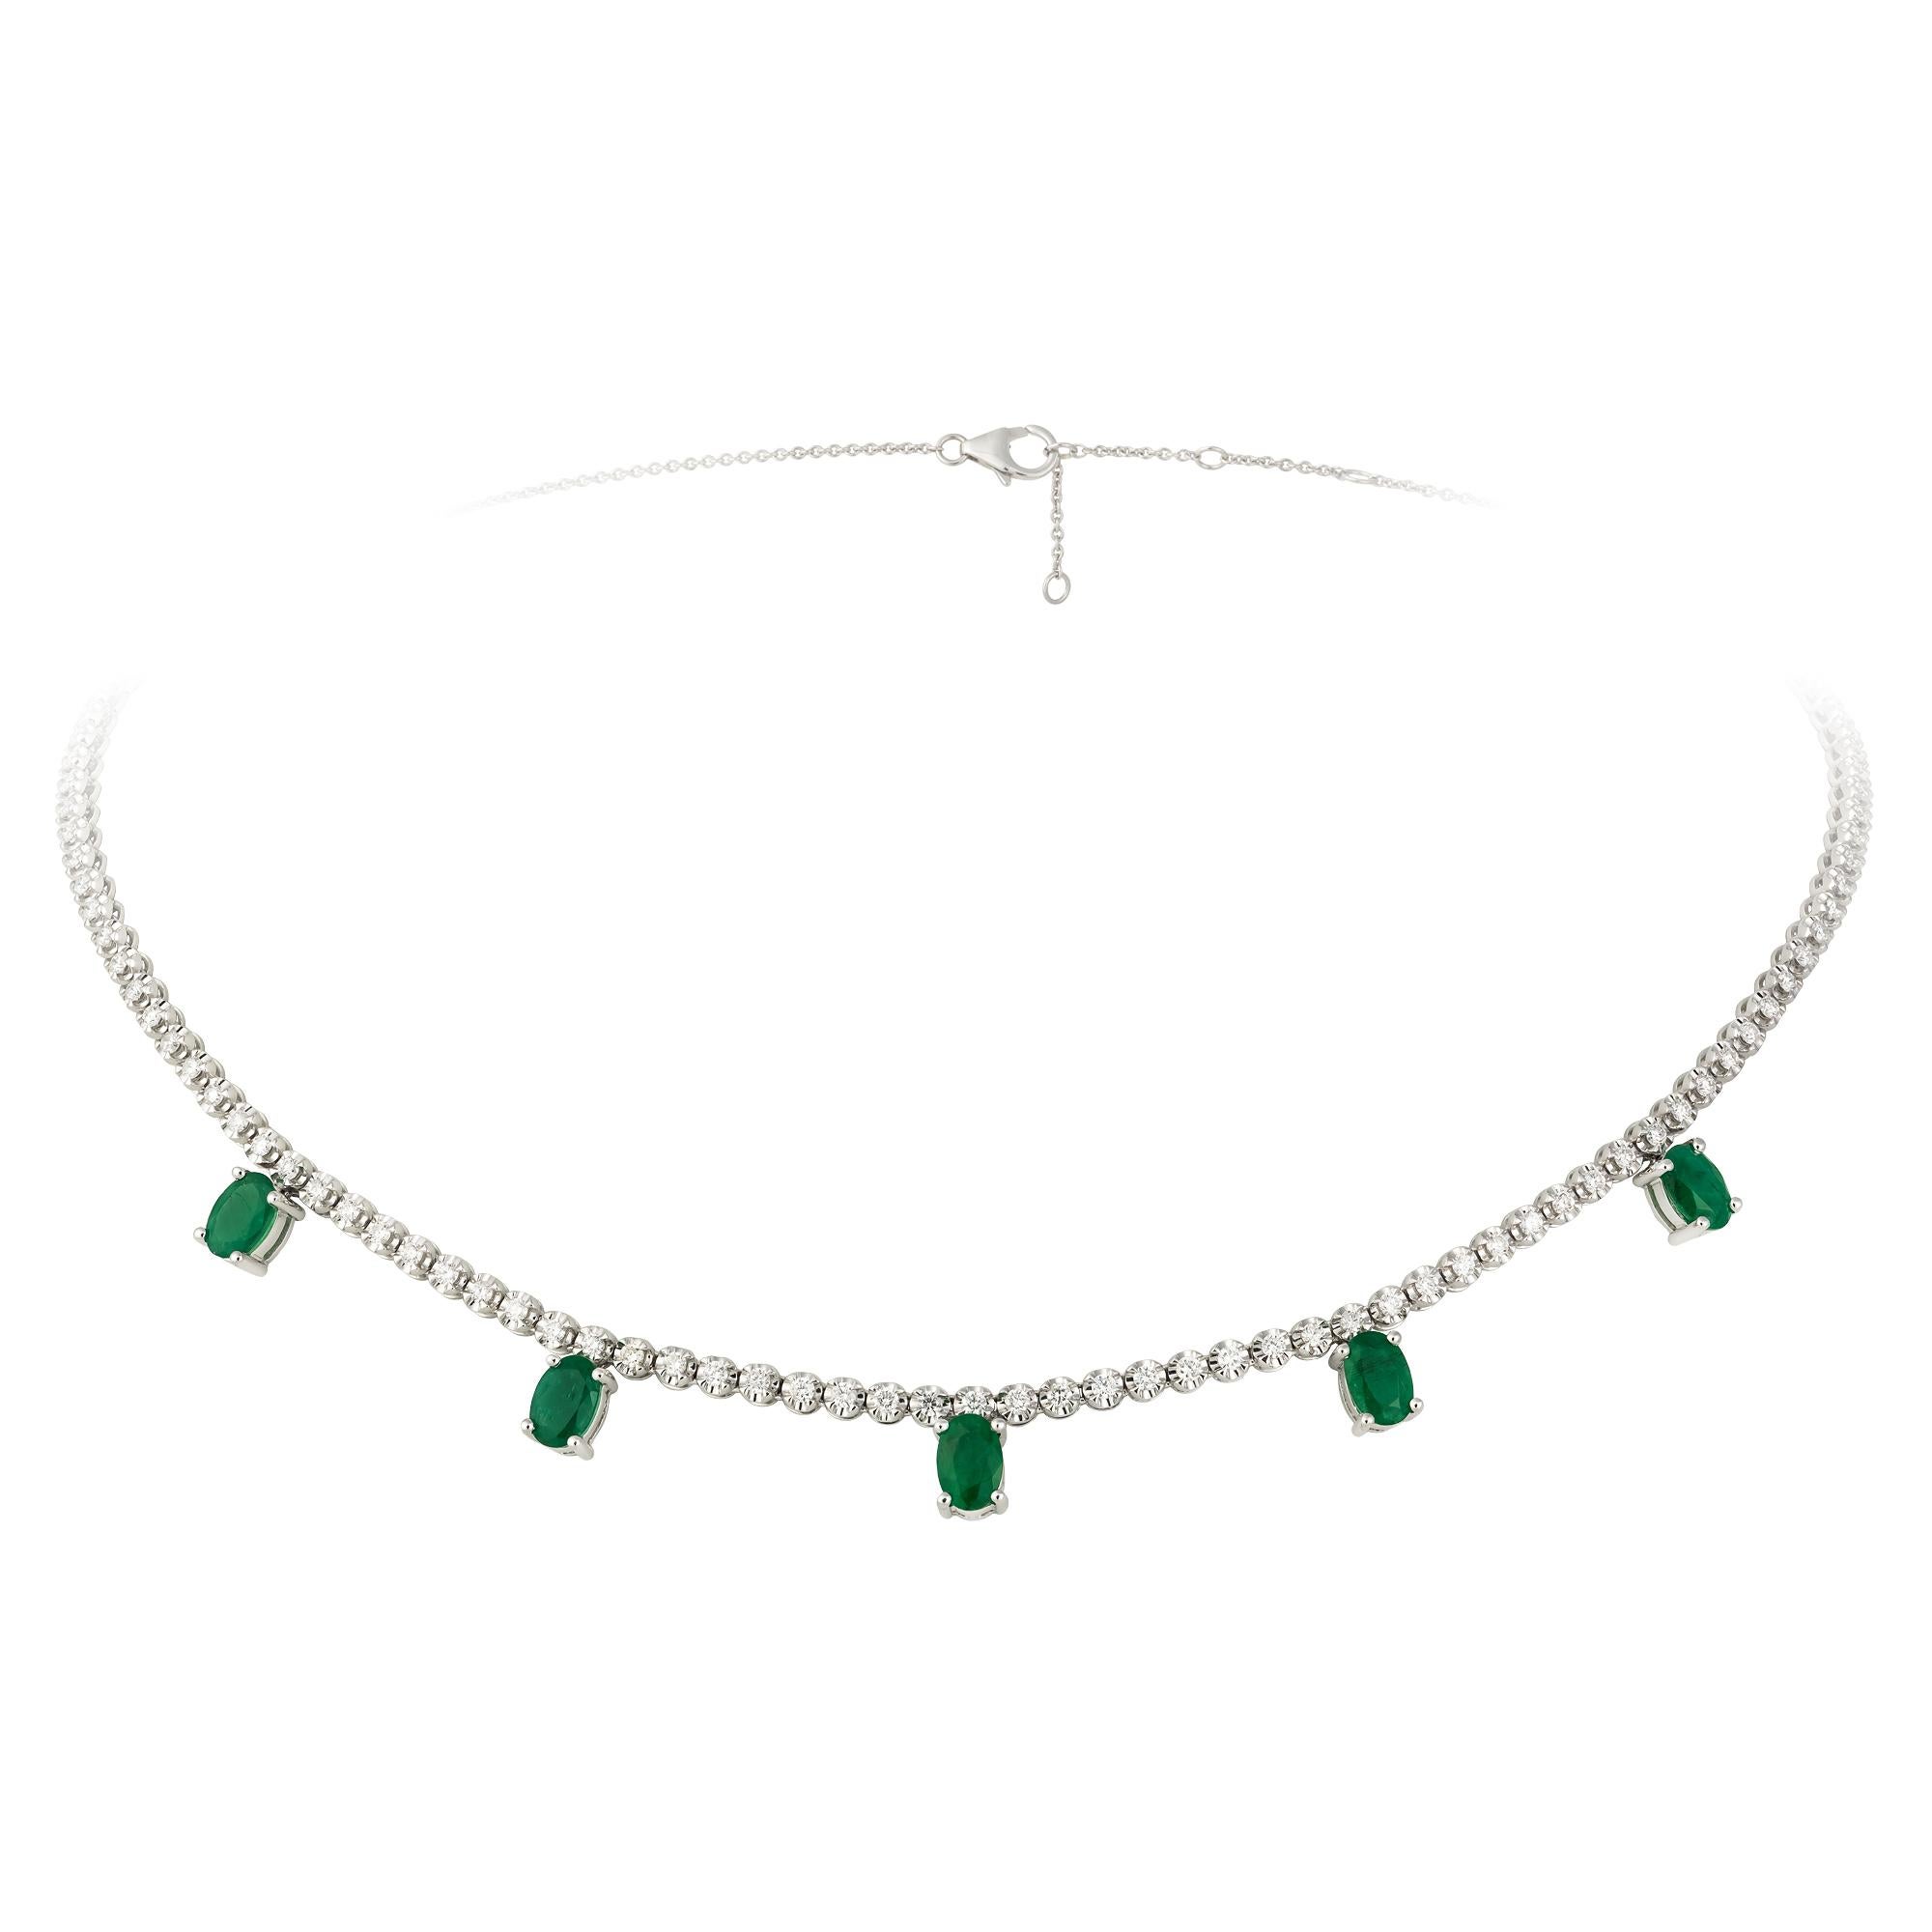 Necklace White Gold 18 K 

Diamond 1.17 Cts/83 Pcs
Emerald 2.18 Cts/5 Pcs
Weight 10,69 grams

With a heritage of ancient fine Swiss jewelry traditions, NATKINA is a Geneva based jewellery brand, which creates modern jewellery masterpieces suitable